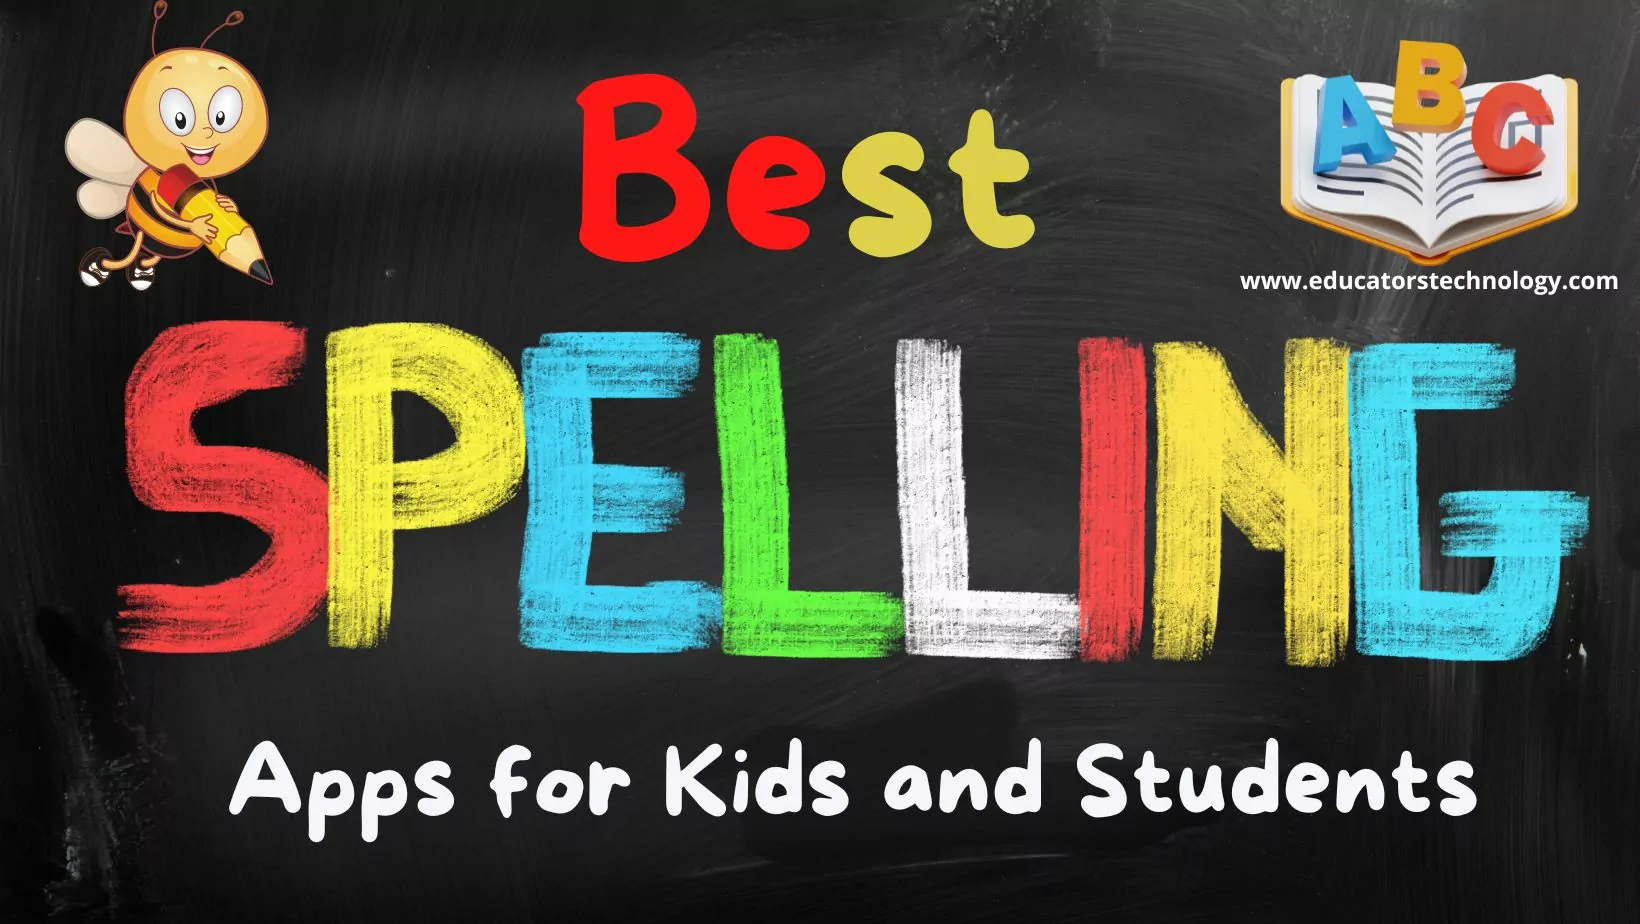 Spell Checking Apps – Supports for Students with LD #2